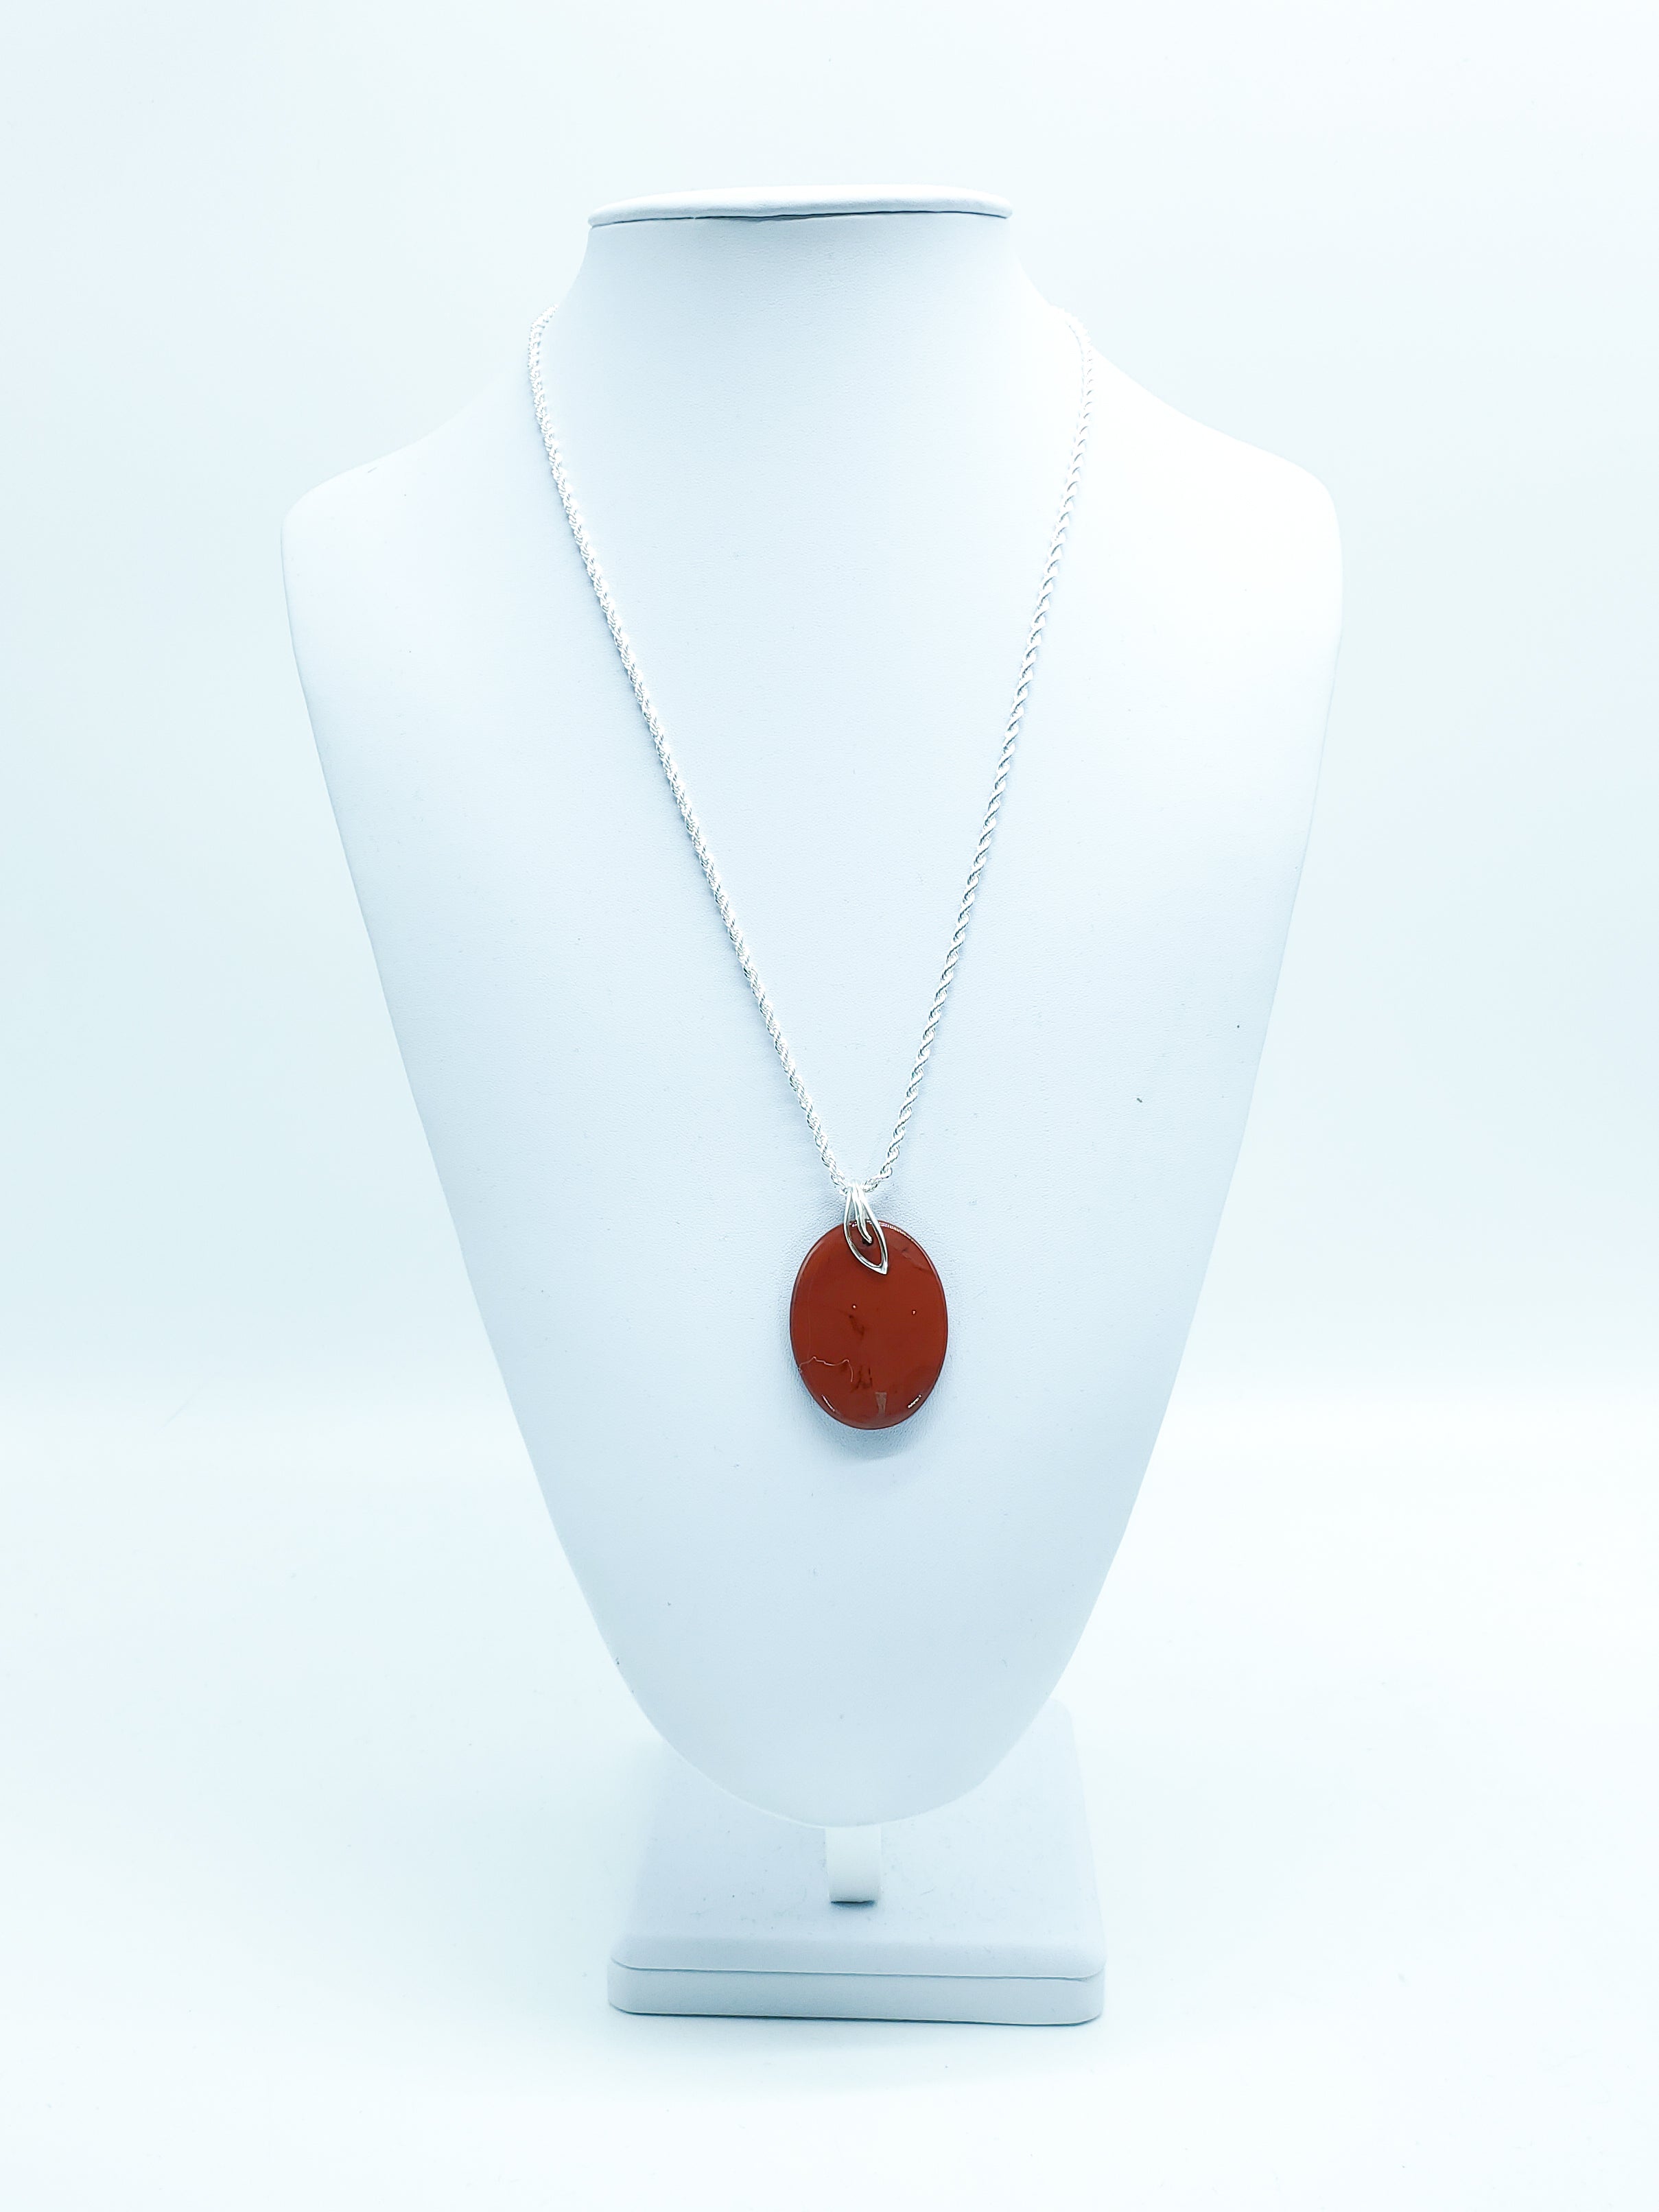 Red Jasper Oval with Leaf Bail on Sterling Silver Rope Chain - The Caffeinated Raven